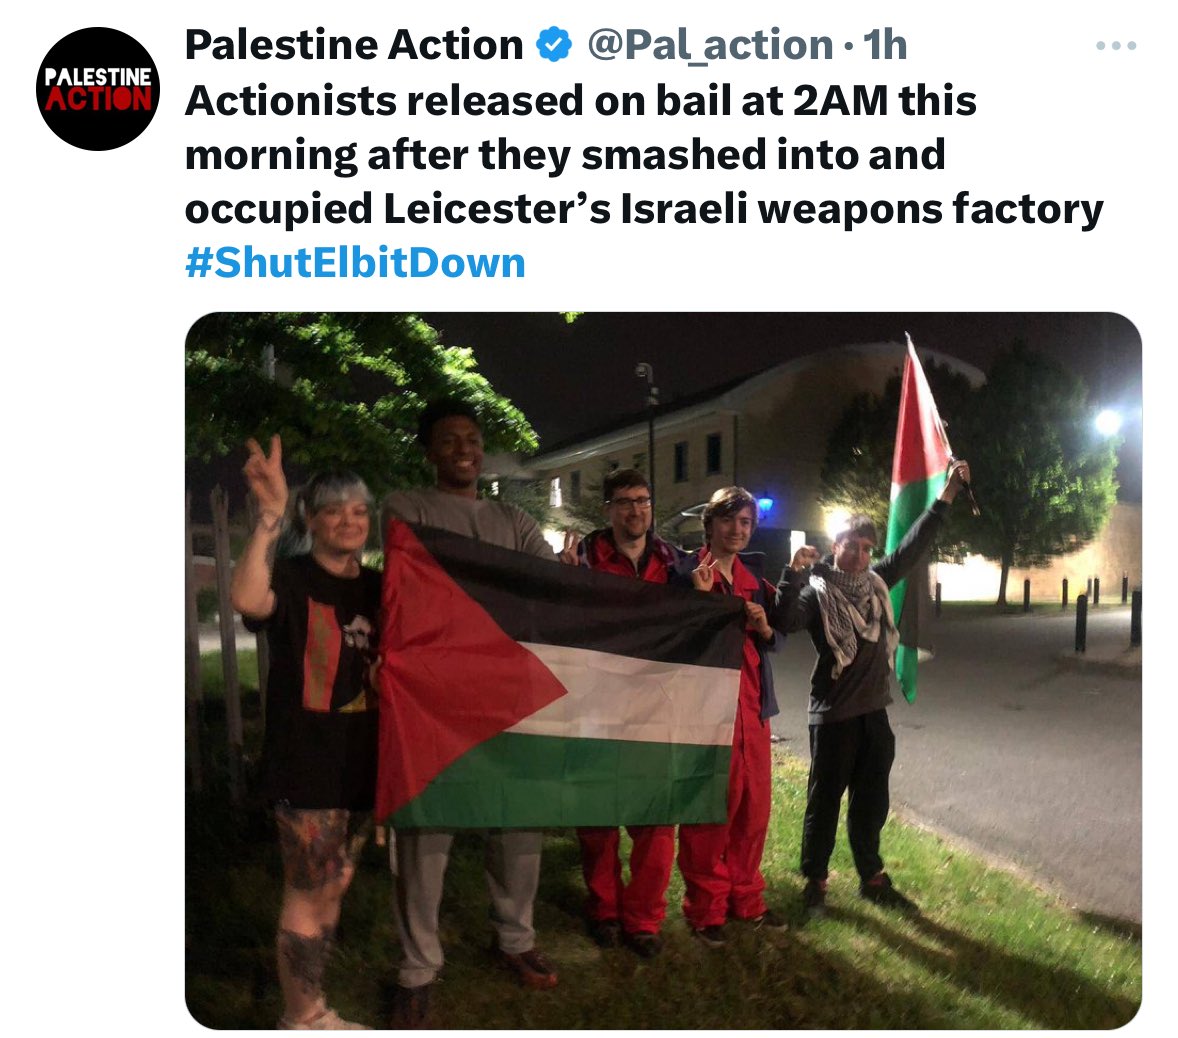 Yesterday a handful of @Pal_action activists in Leicester managed to: - Take over the Elbit factory - Make a hole in the roof & show proof of the killer drones - Get @fbunational to issue a statement in solidarity w 🇵🇸 & asked members not to help police DIRECT ACTION > PROTESTS